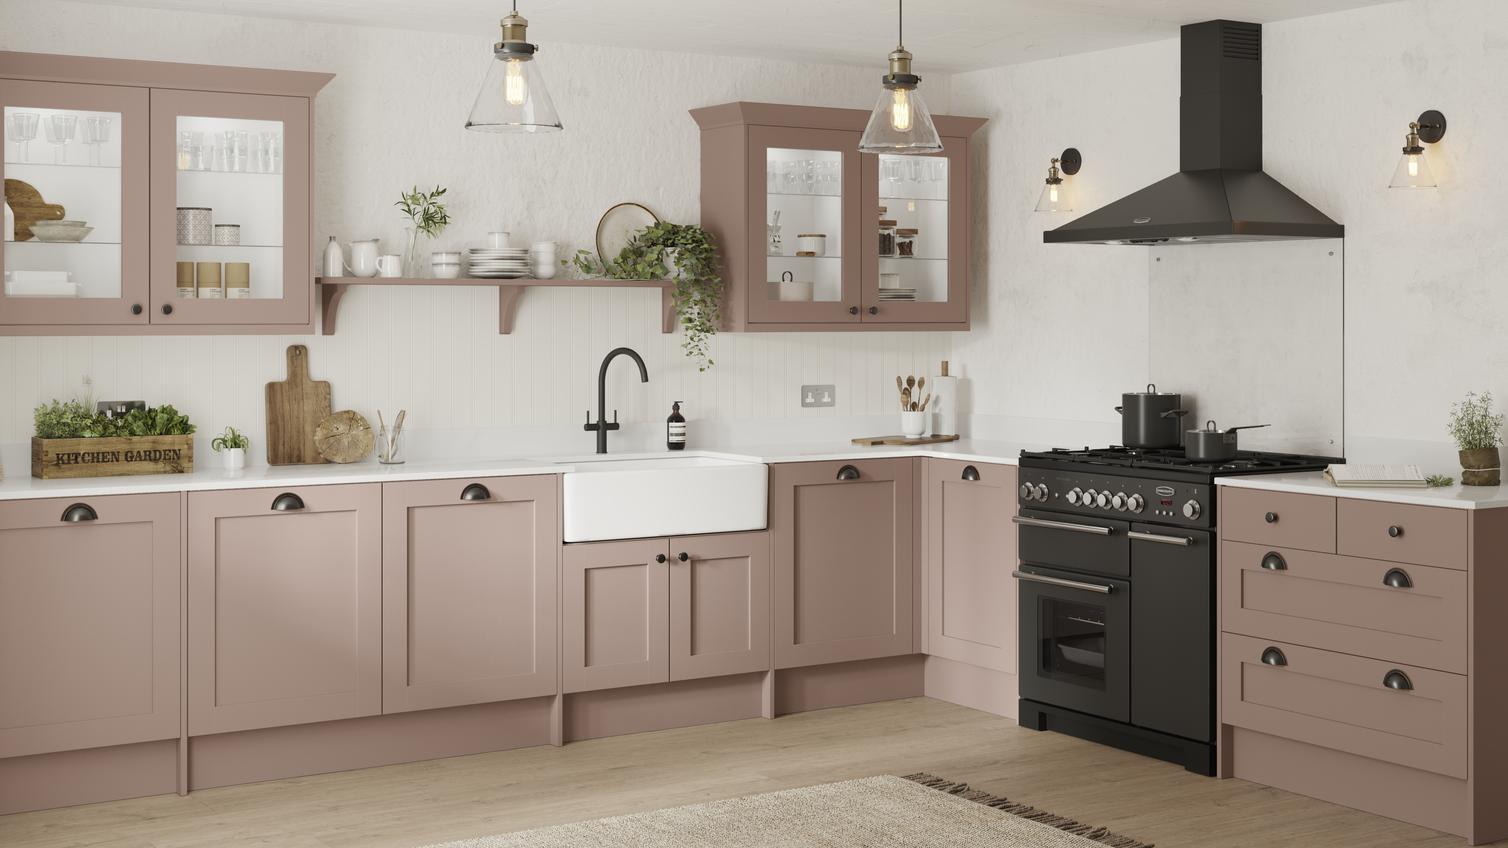 A chilcomb shaker kitchen in an antique rose colour